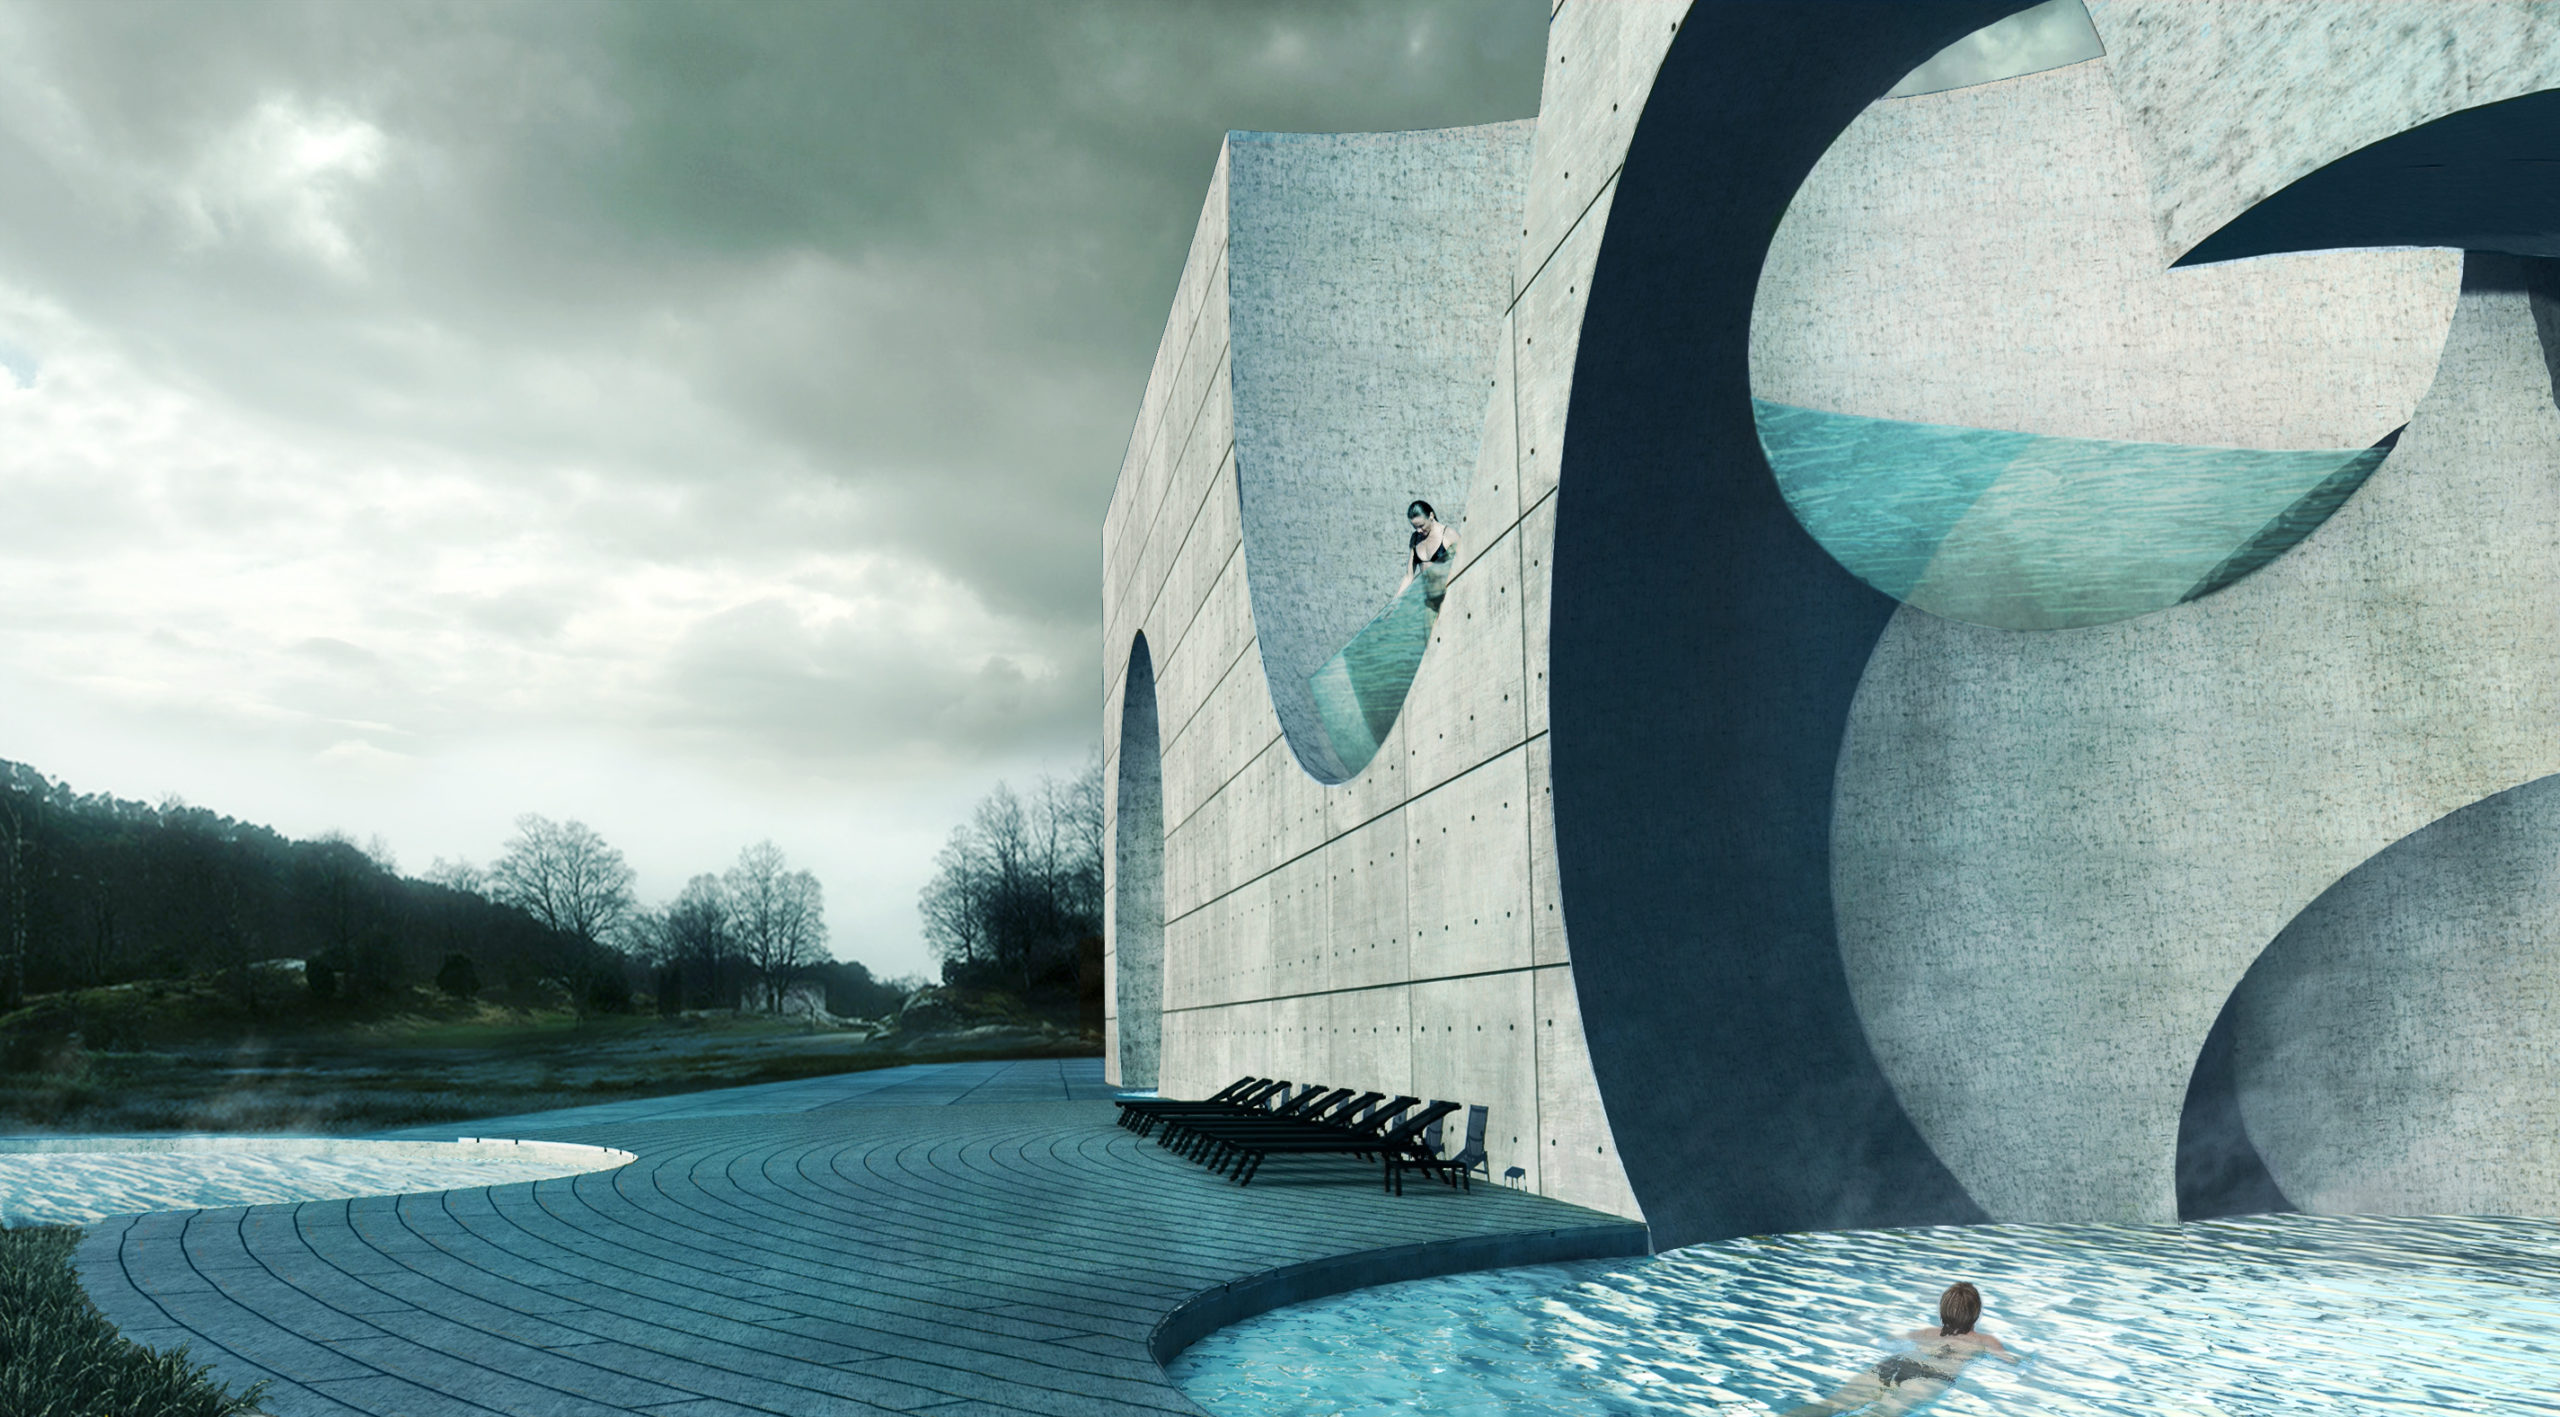 spa architecture Liepaja Thermal Bath by Steven Christensen Architecture, Liepaja, Latvia